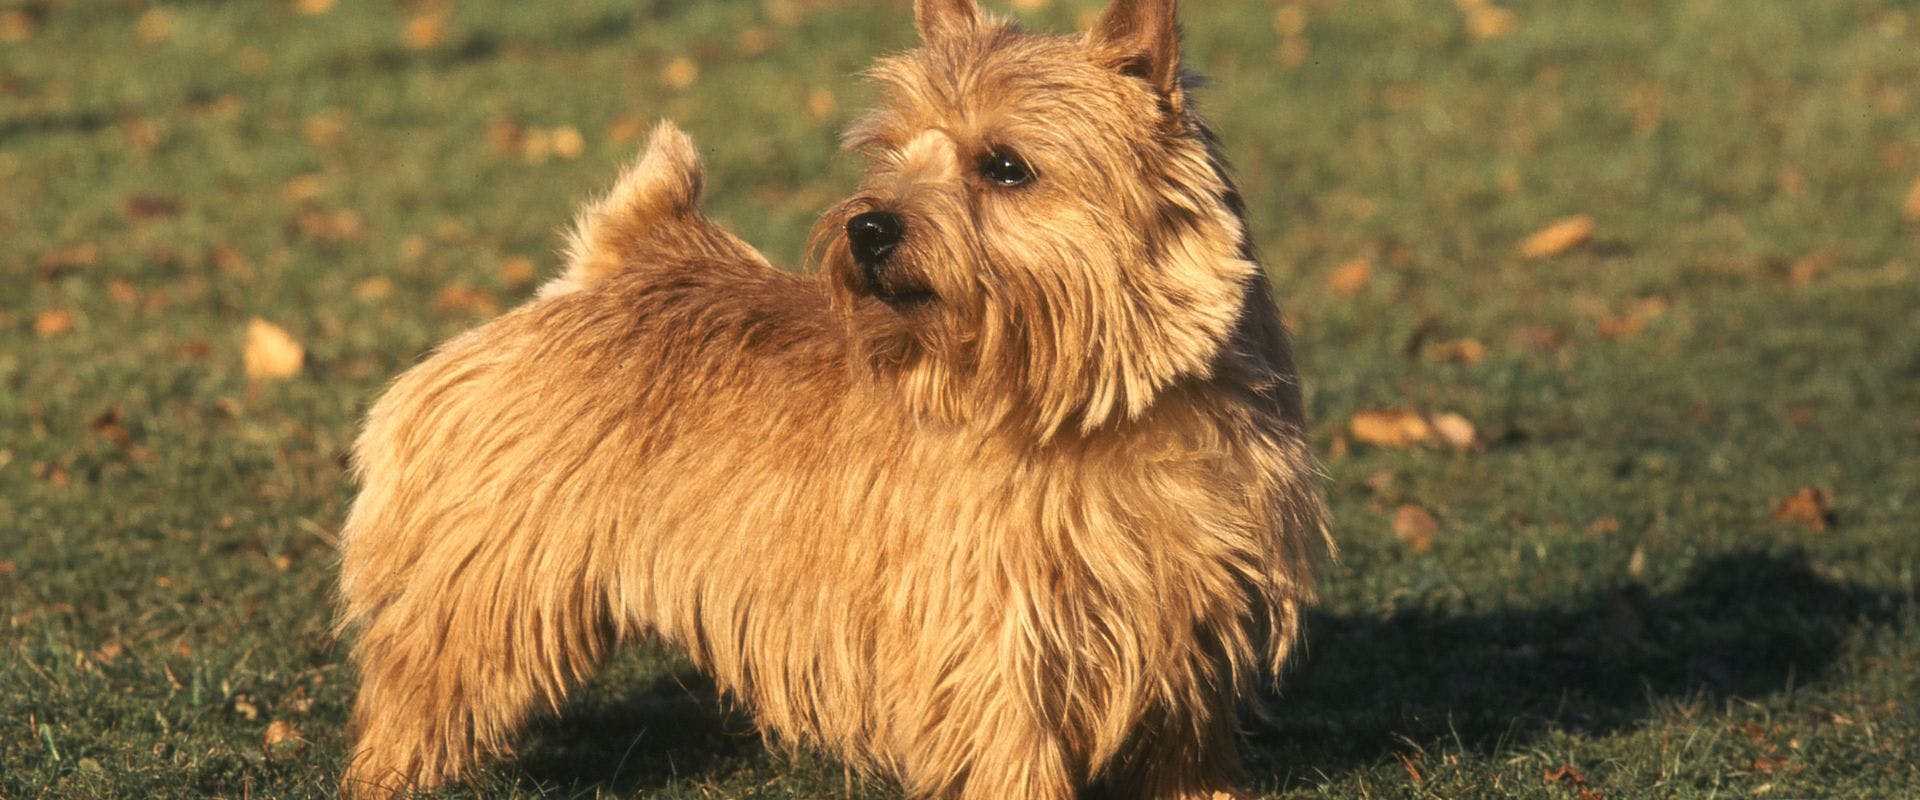 Norwich Terrier stood outdoors